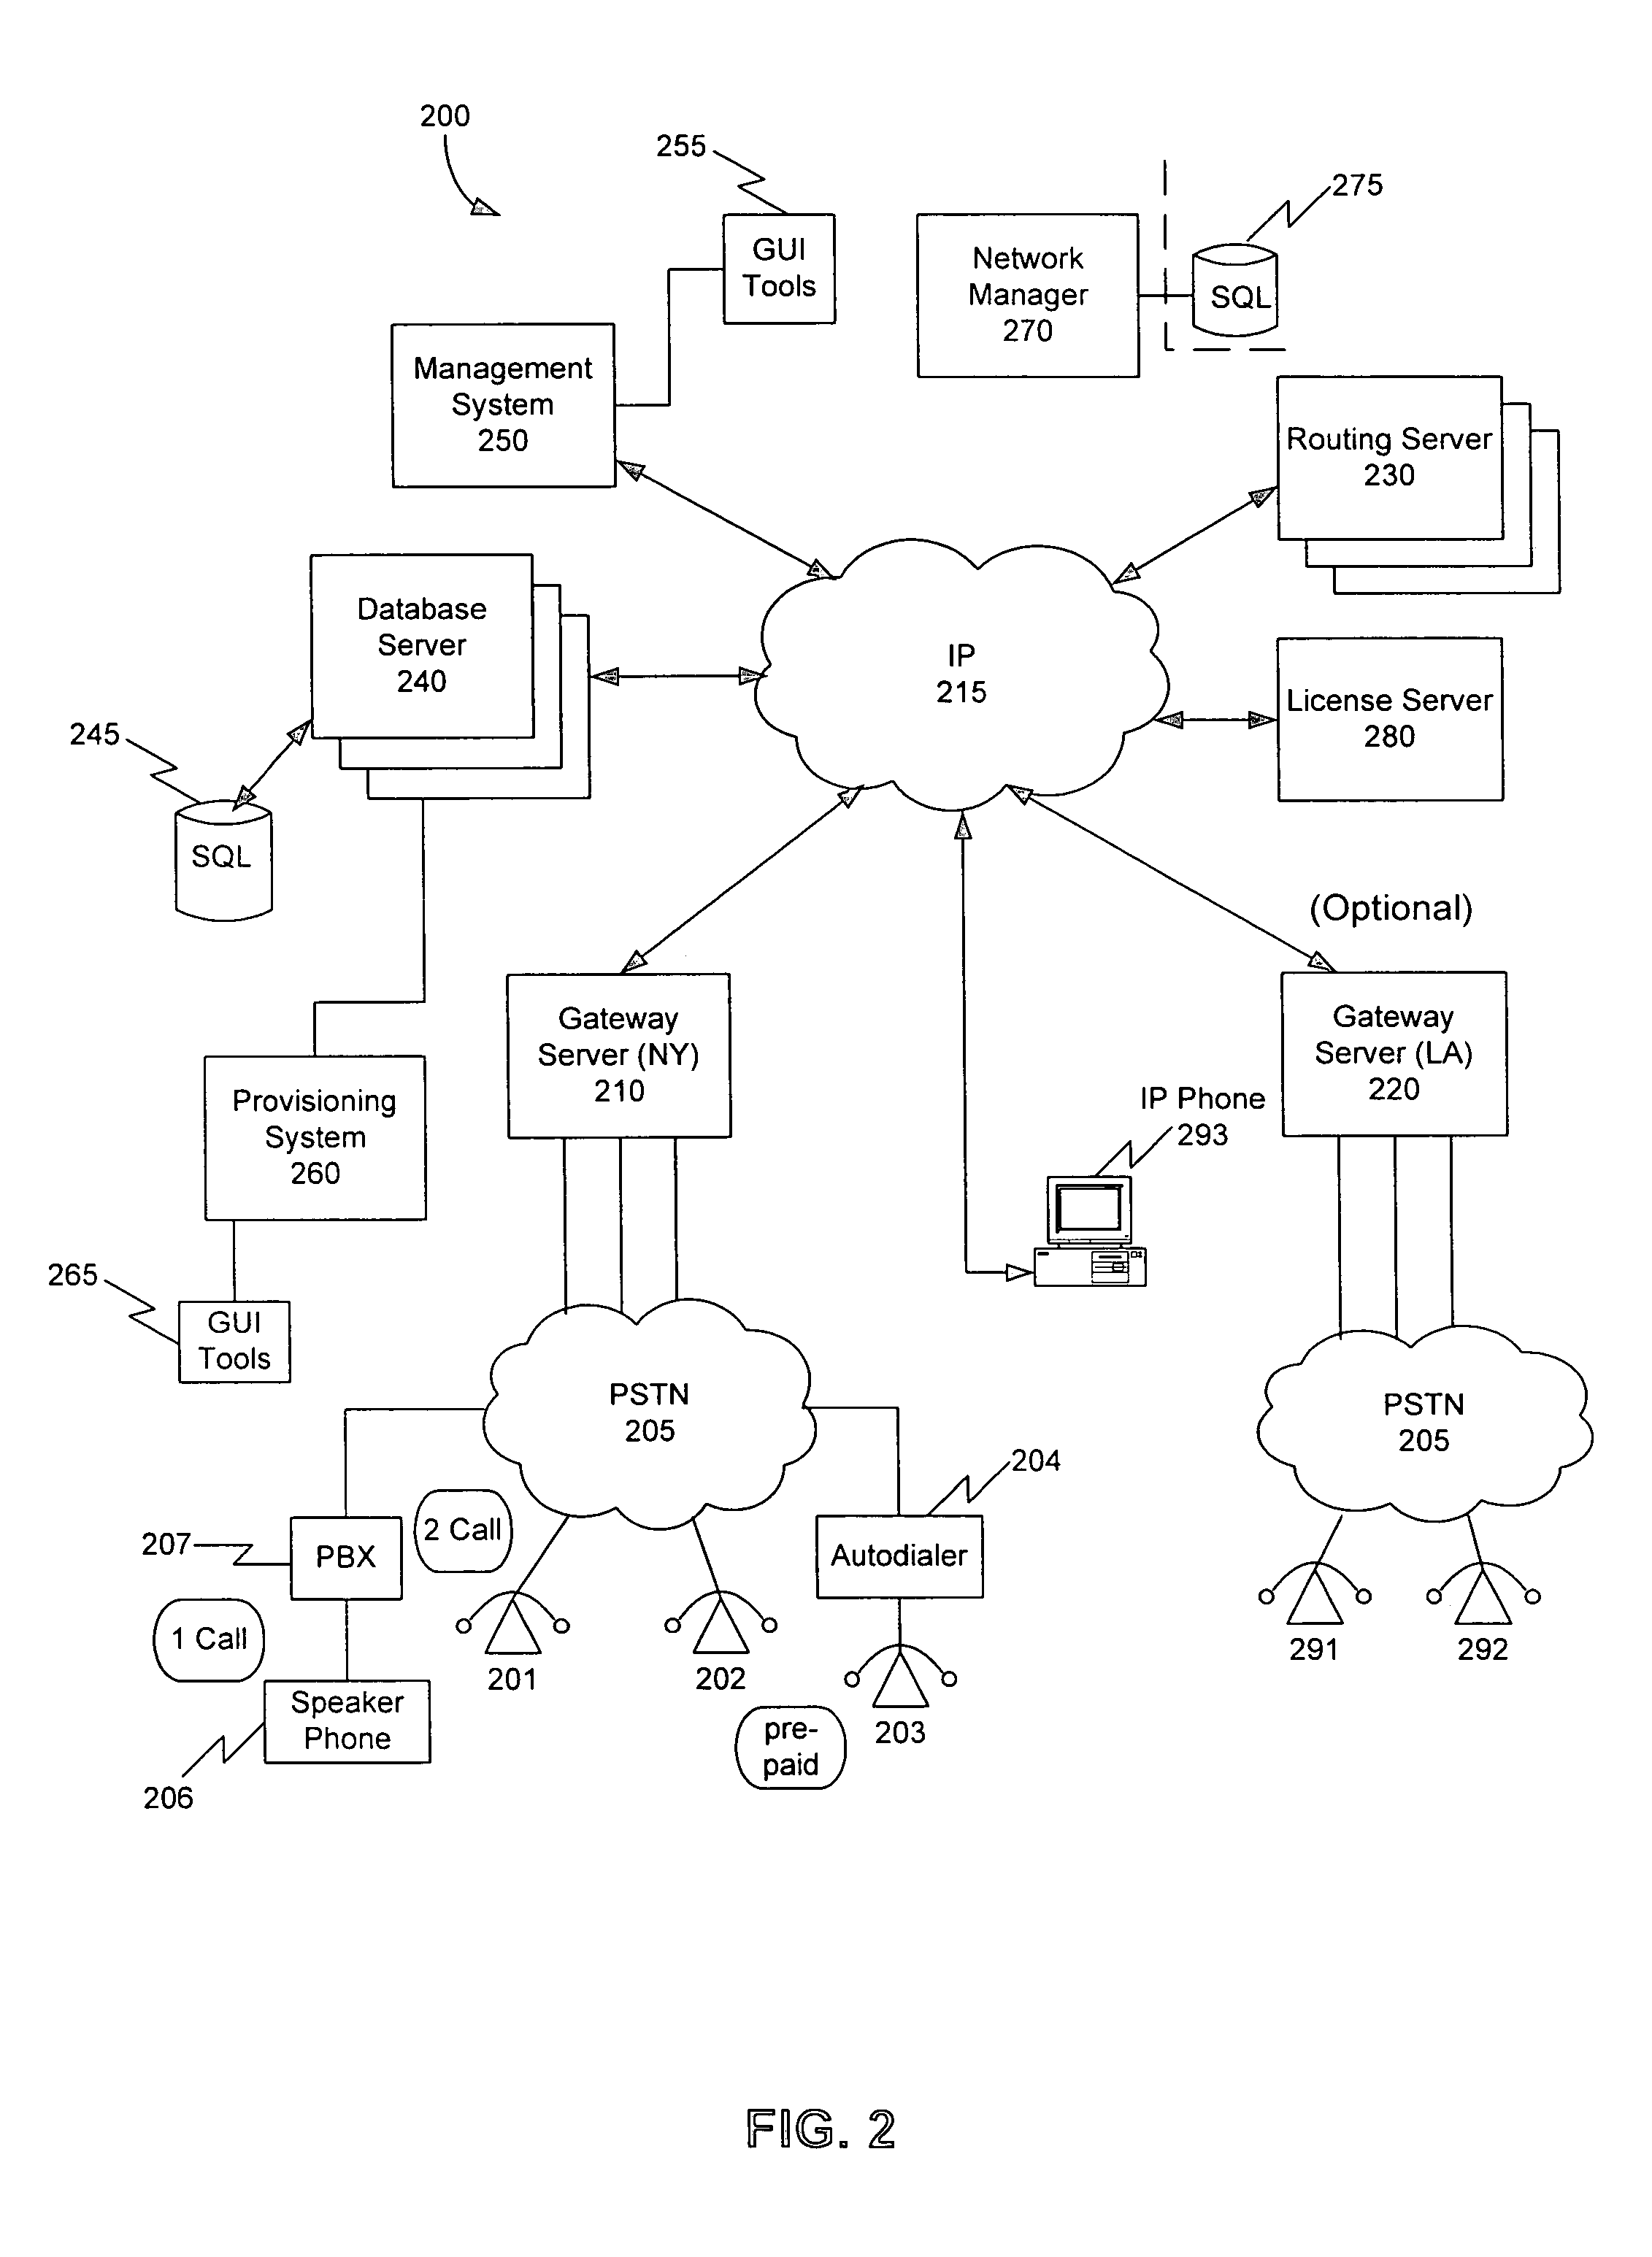 Method, system, and computer program product for managing routing servers and services